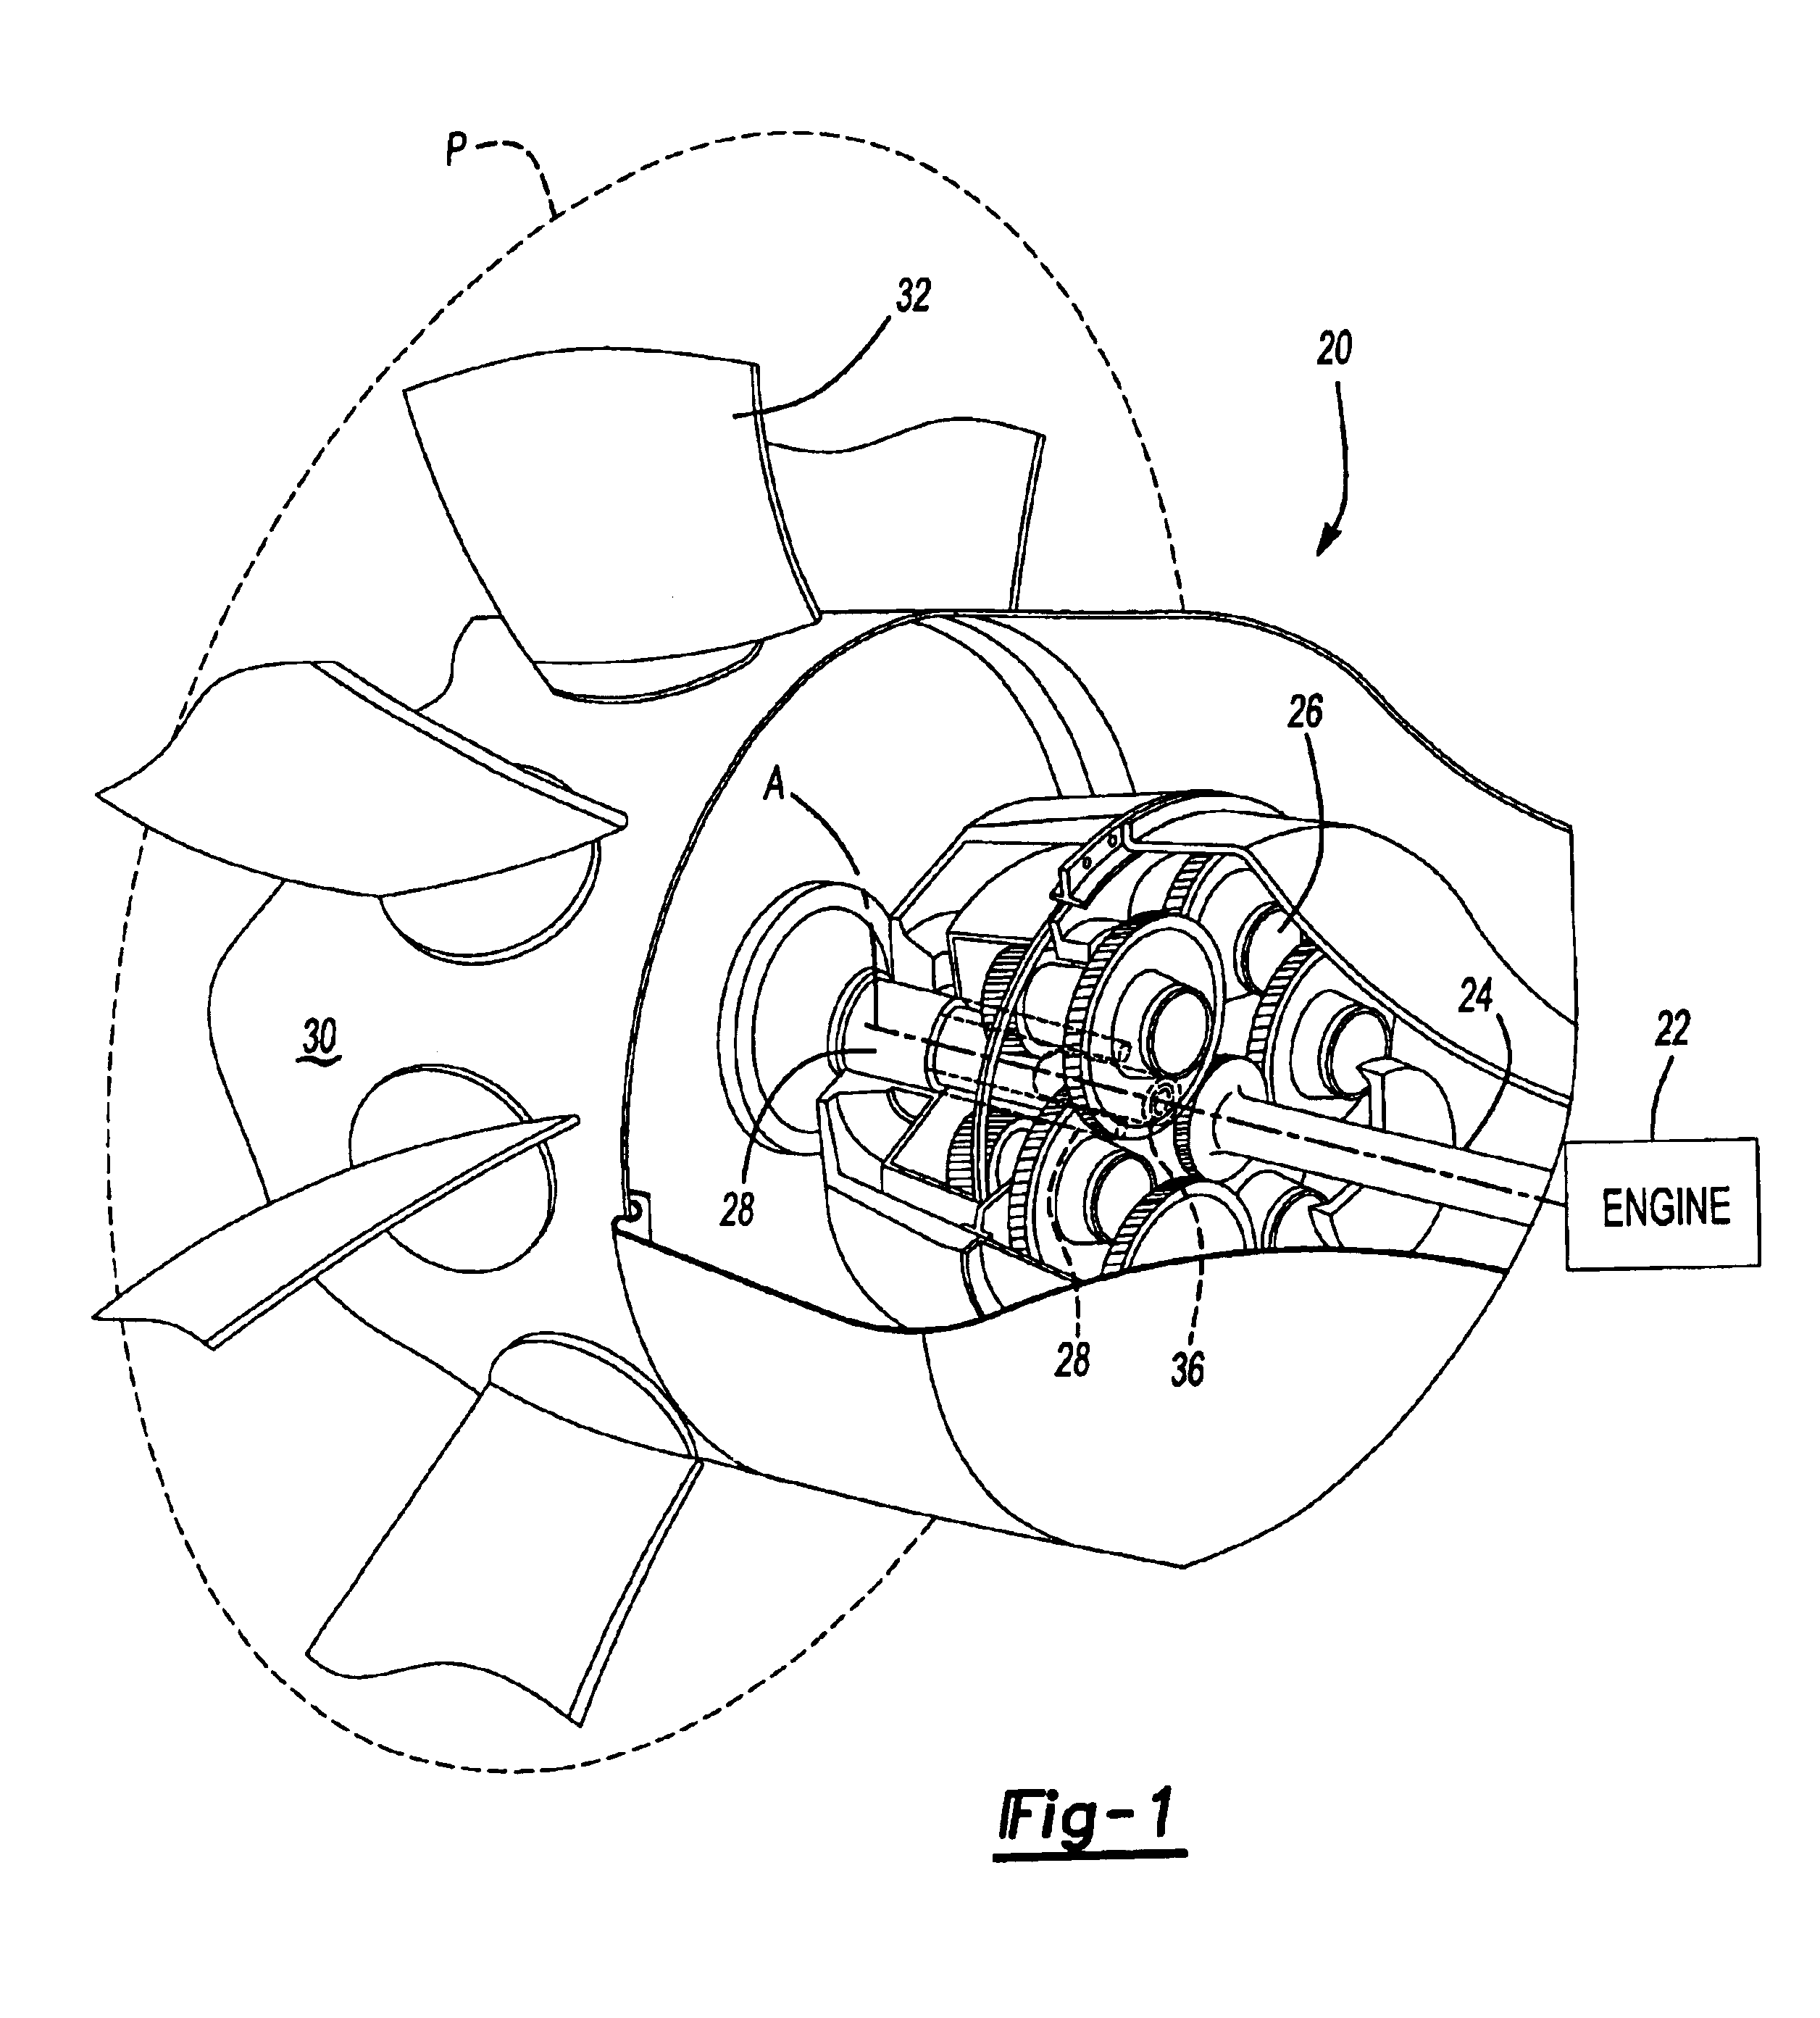 Cyclic actuation system for a controllable pitch propeller and a method of providing aircraft control therewith